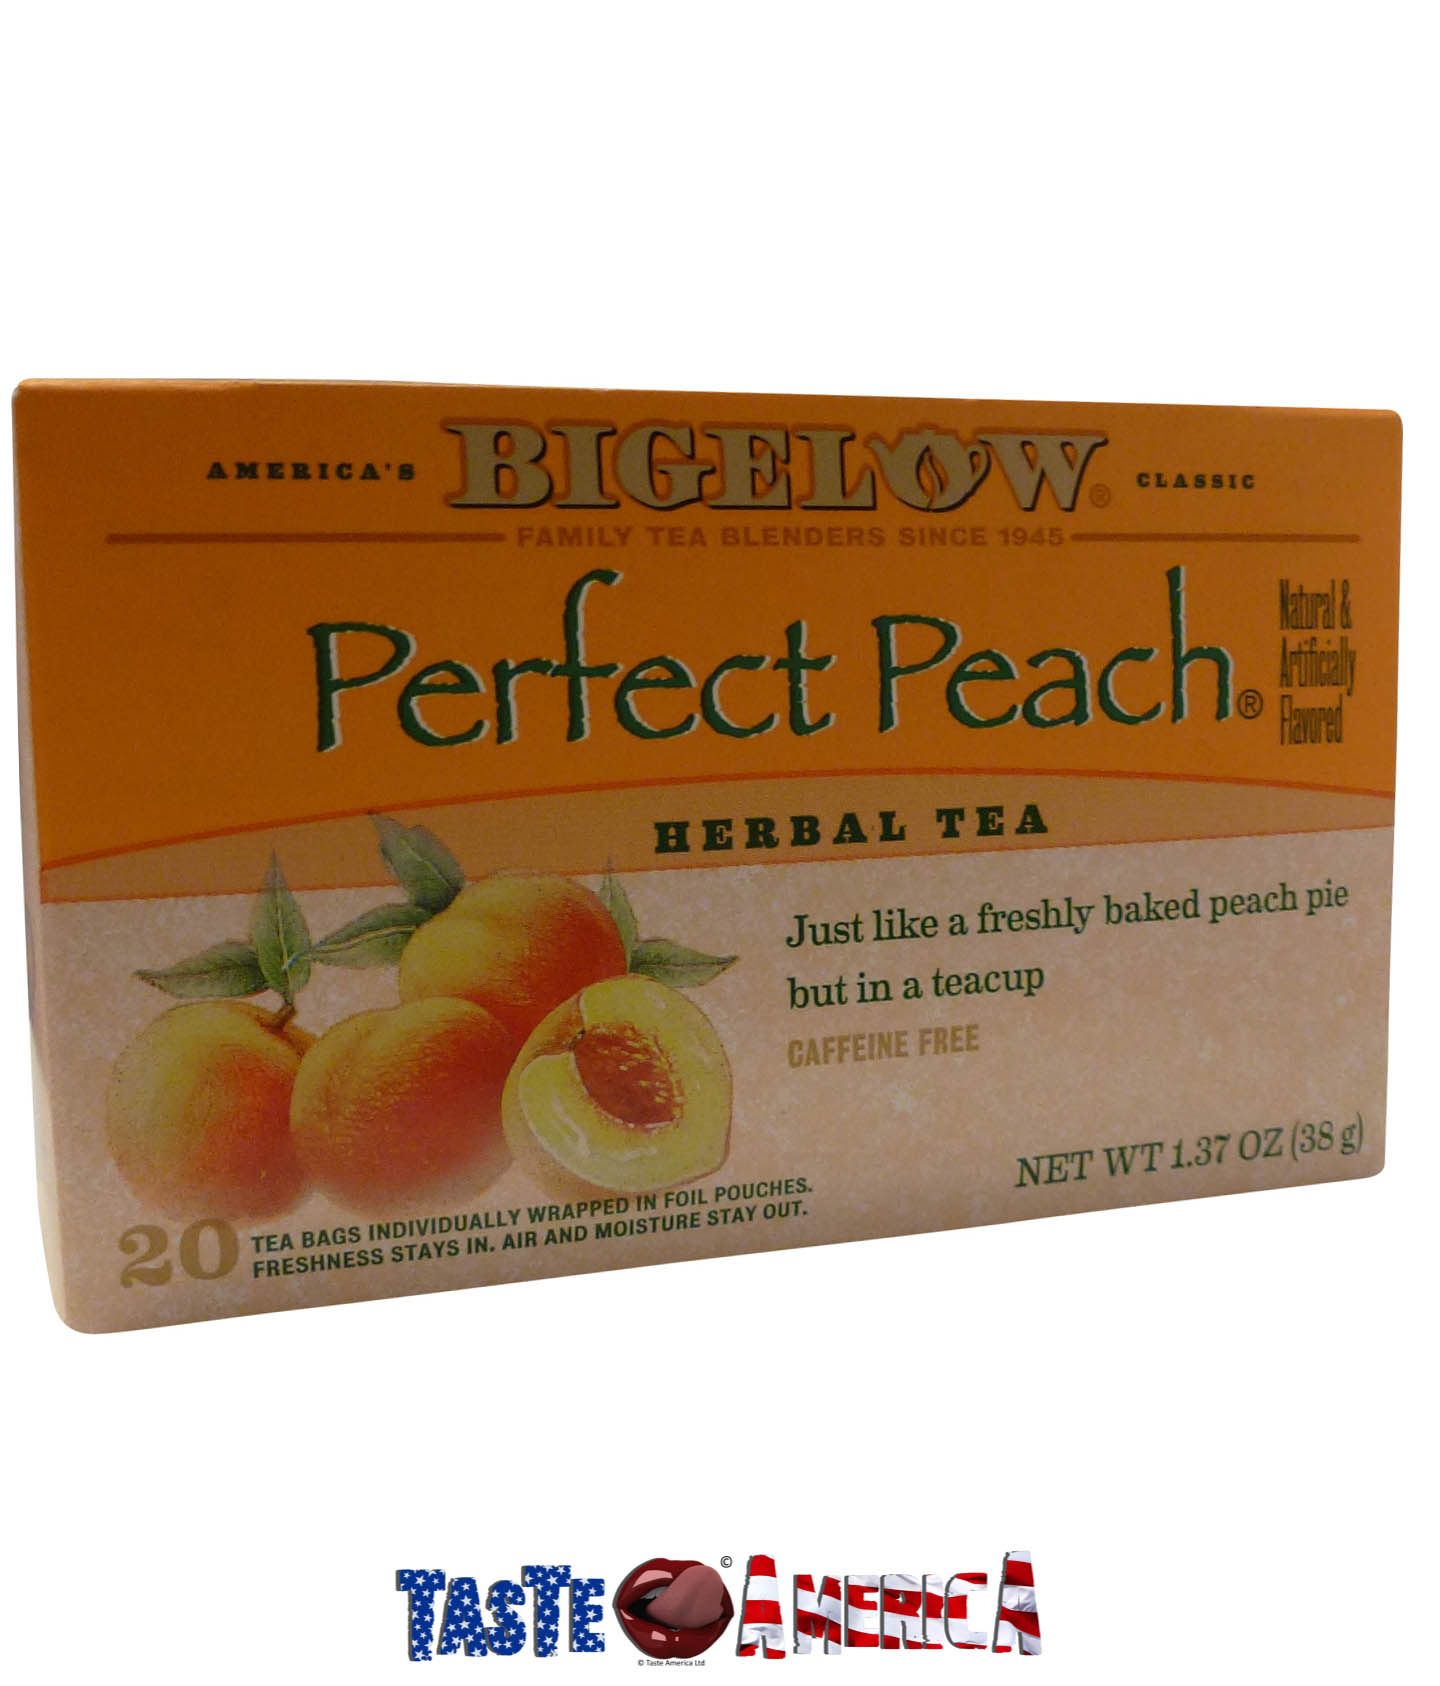 Lipton Peach Flavour Cold Brew 15 Biodegradable Tea Bags (37.5g) - Compare  Prices & Where To Buy - Trolley.co.uk